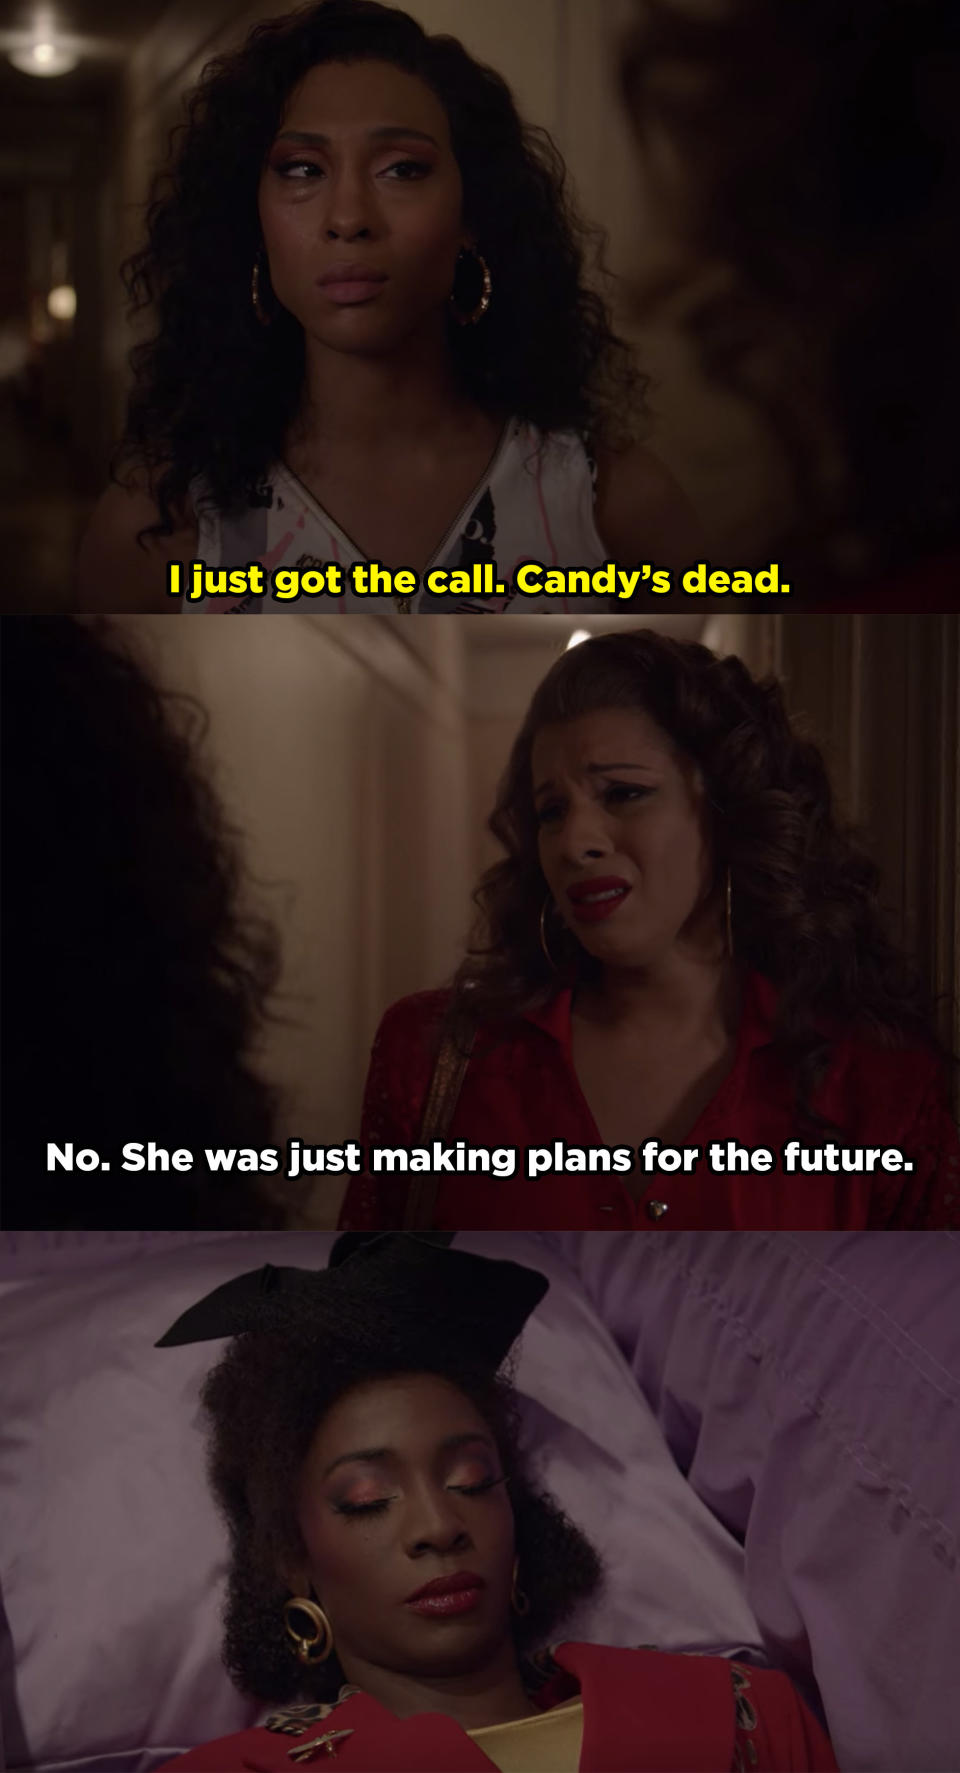 Blanca gets the call that Candy died, right as she was planning for the future, and the girls attend her funeral